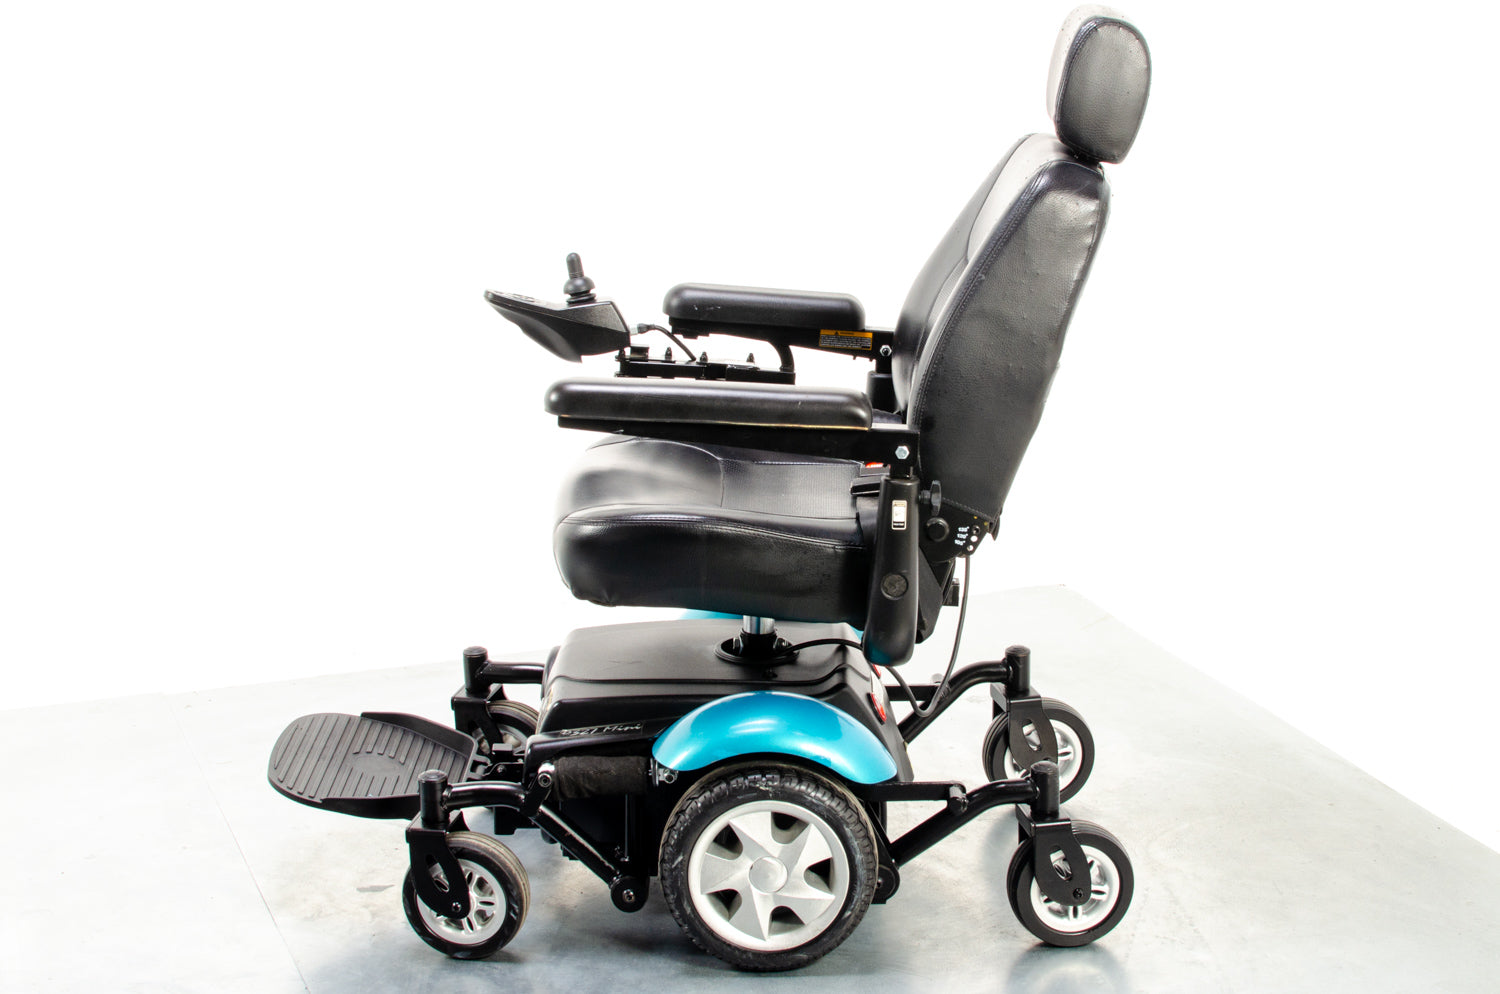 Rascal P327 Used Powerchair Electric Mobility Wheelchair Teal 4mph MWD